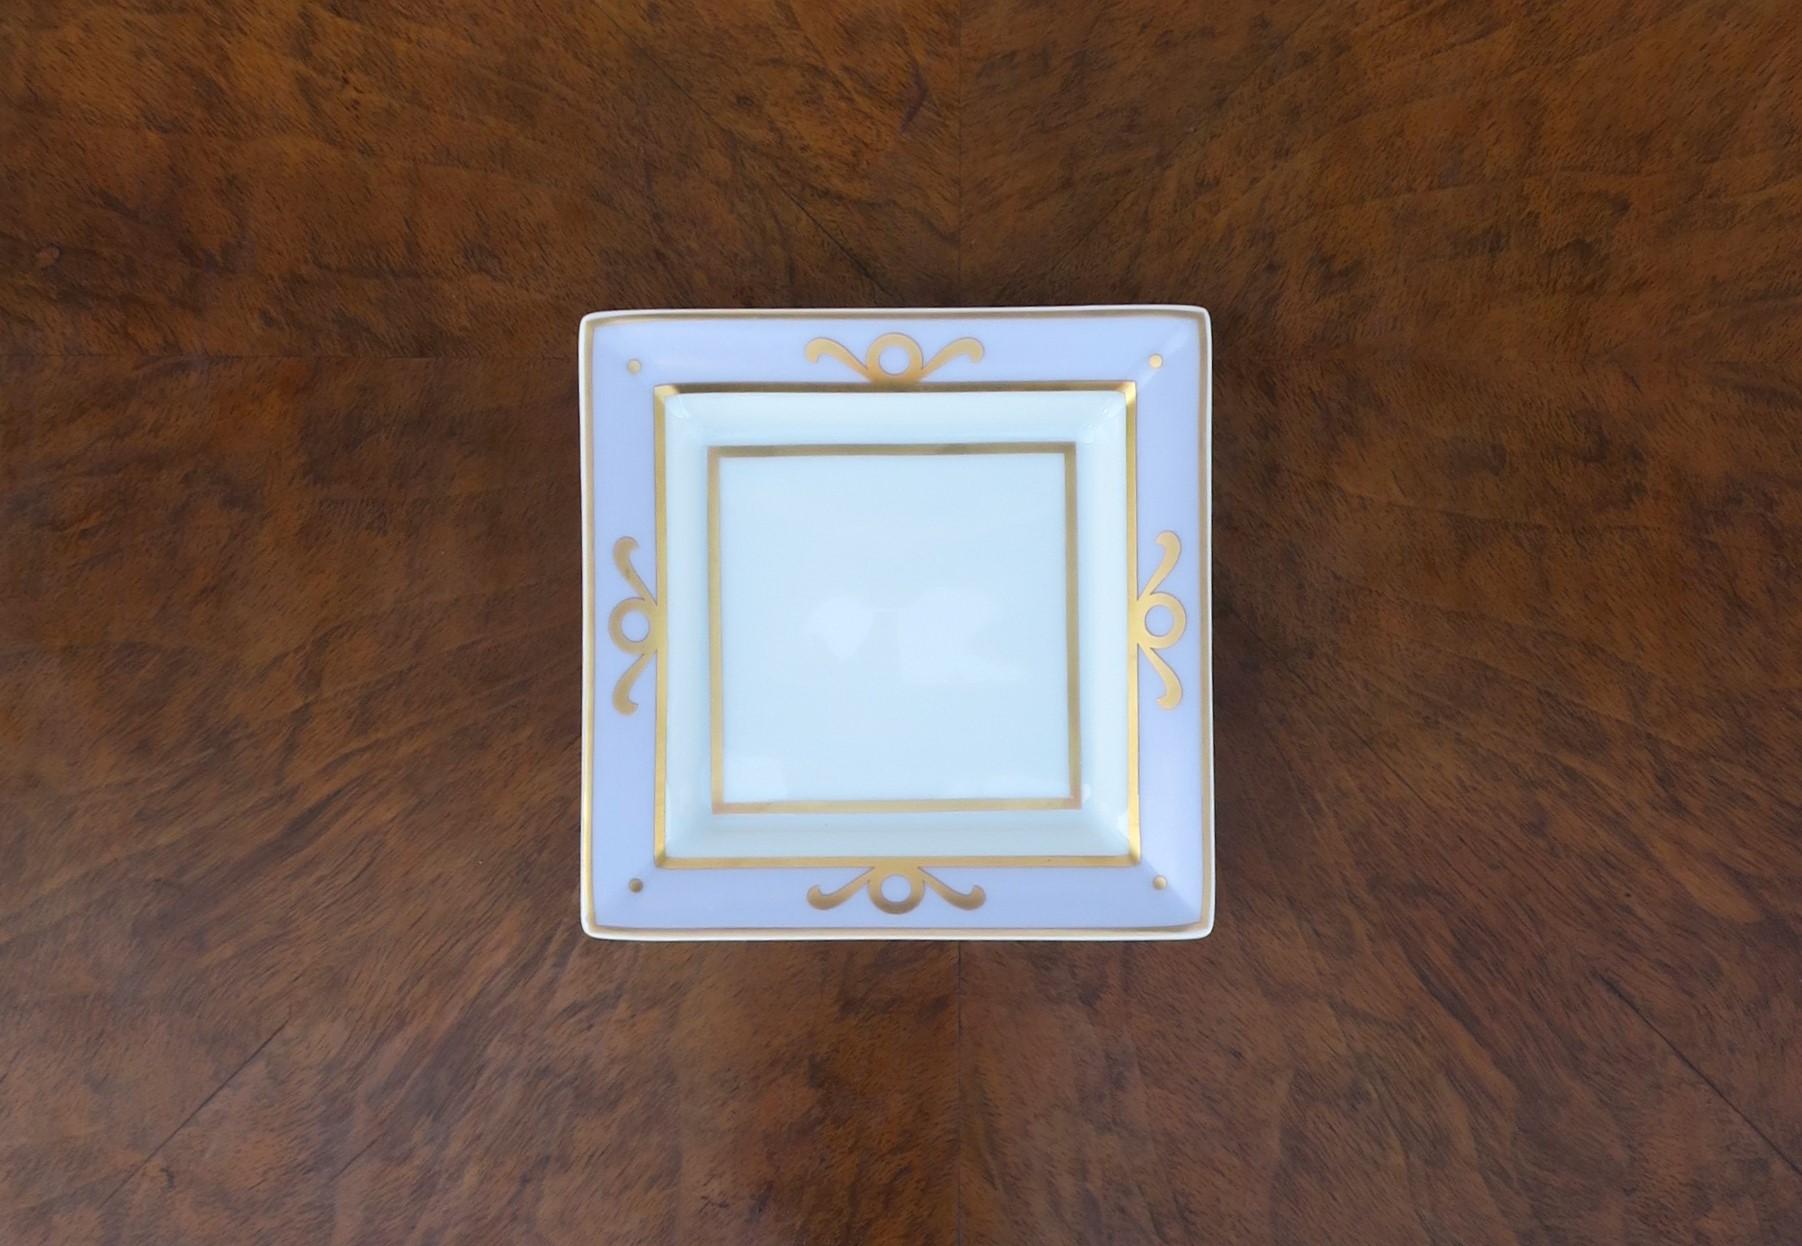 A beautiful French white porcelain jewelry dish with pastel light purple lavender and gold hues, Limoges, France, circa late-20th century. Piece is from 5-star luxury hotel 'Hotel Meurice Paris', as marked on bottom. Dimensions: 4.25